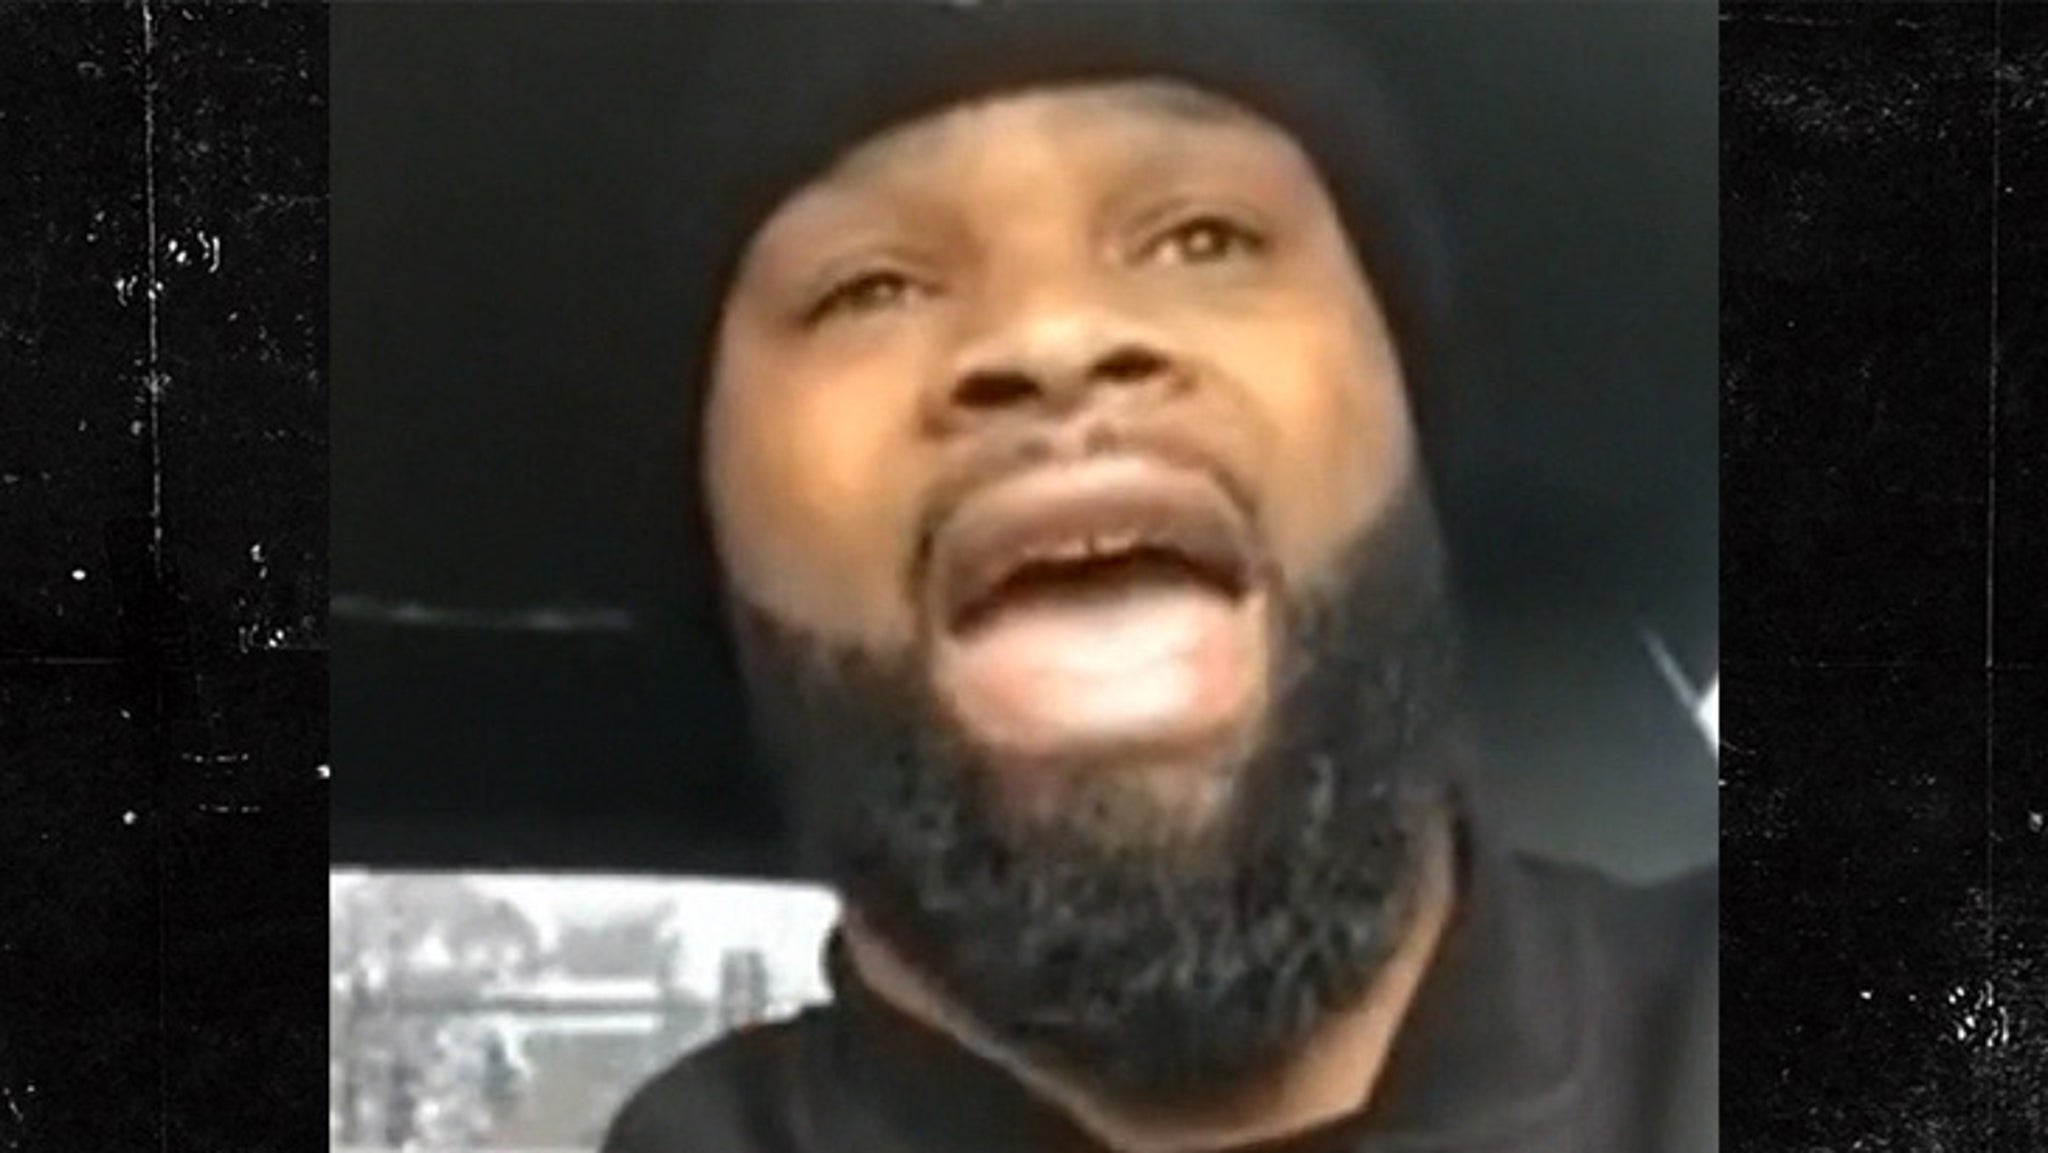 UFC's Tyron Woodley Blasts Wrestling Ref, Fire His Racist Ass